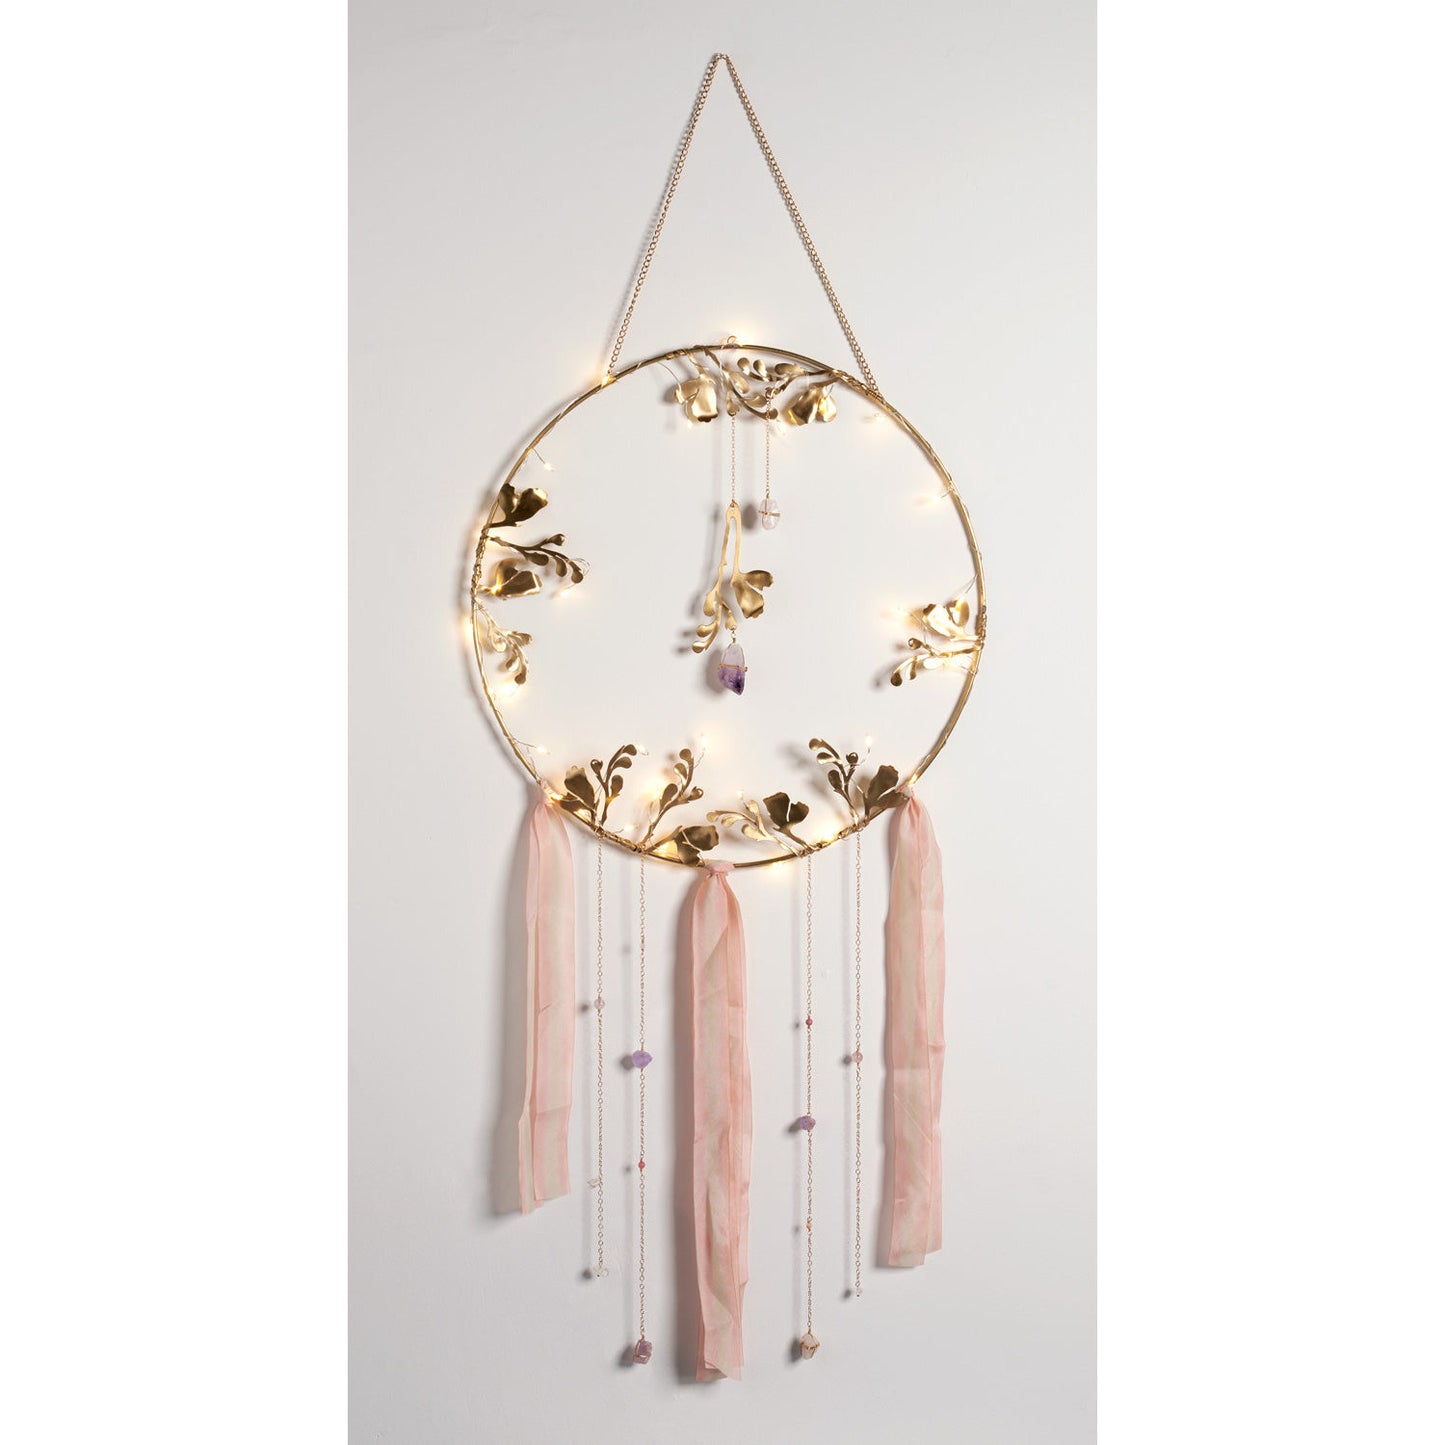 Illuminated Floral Healing Crystal Dreamcatcher by Ariana Ost